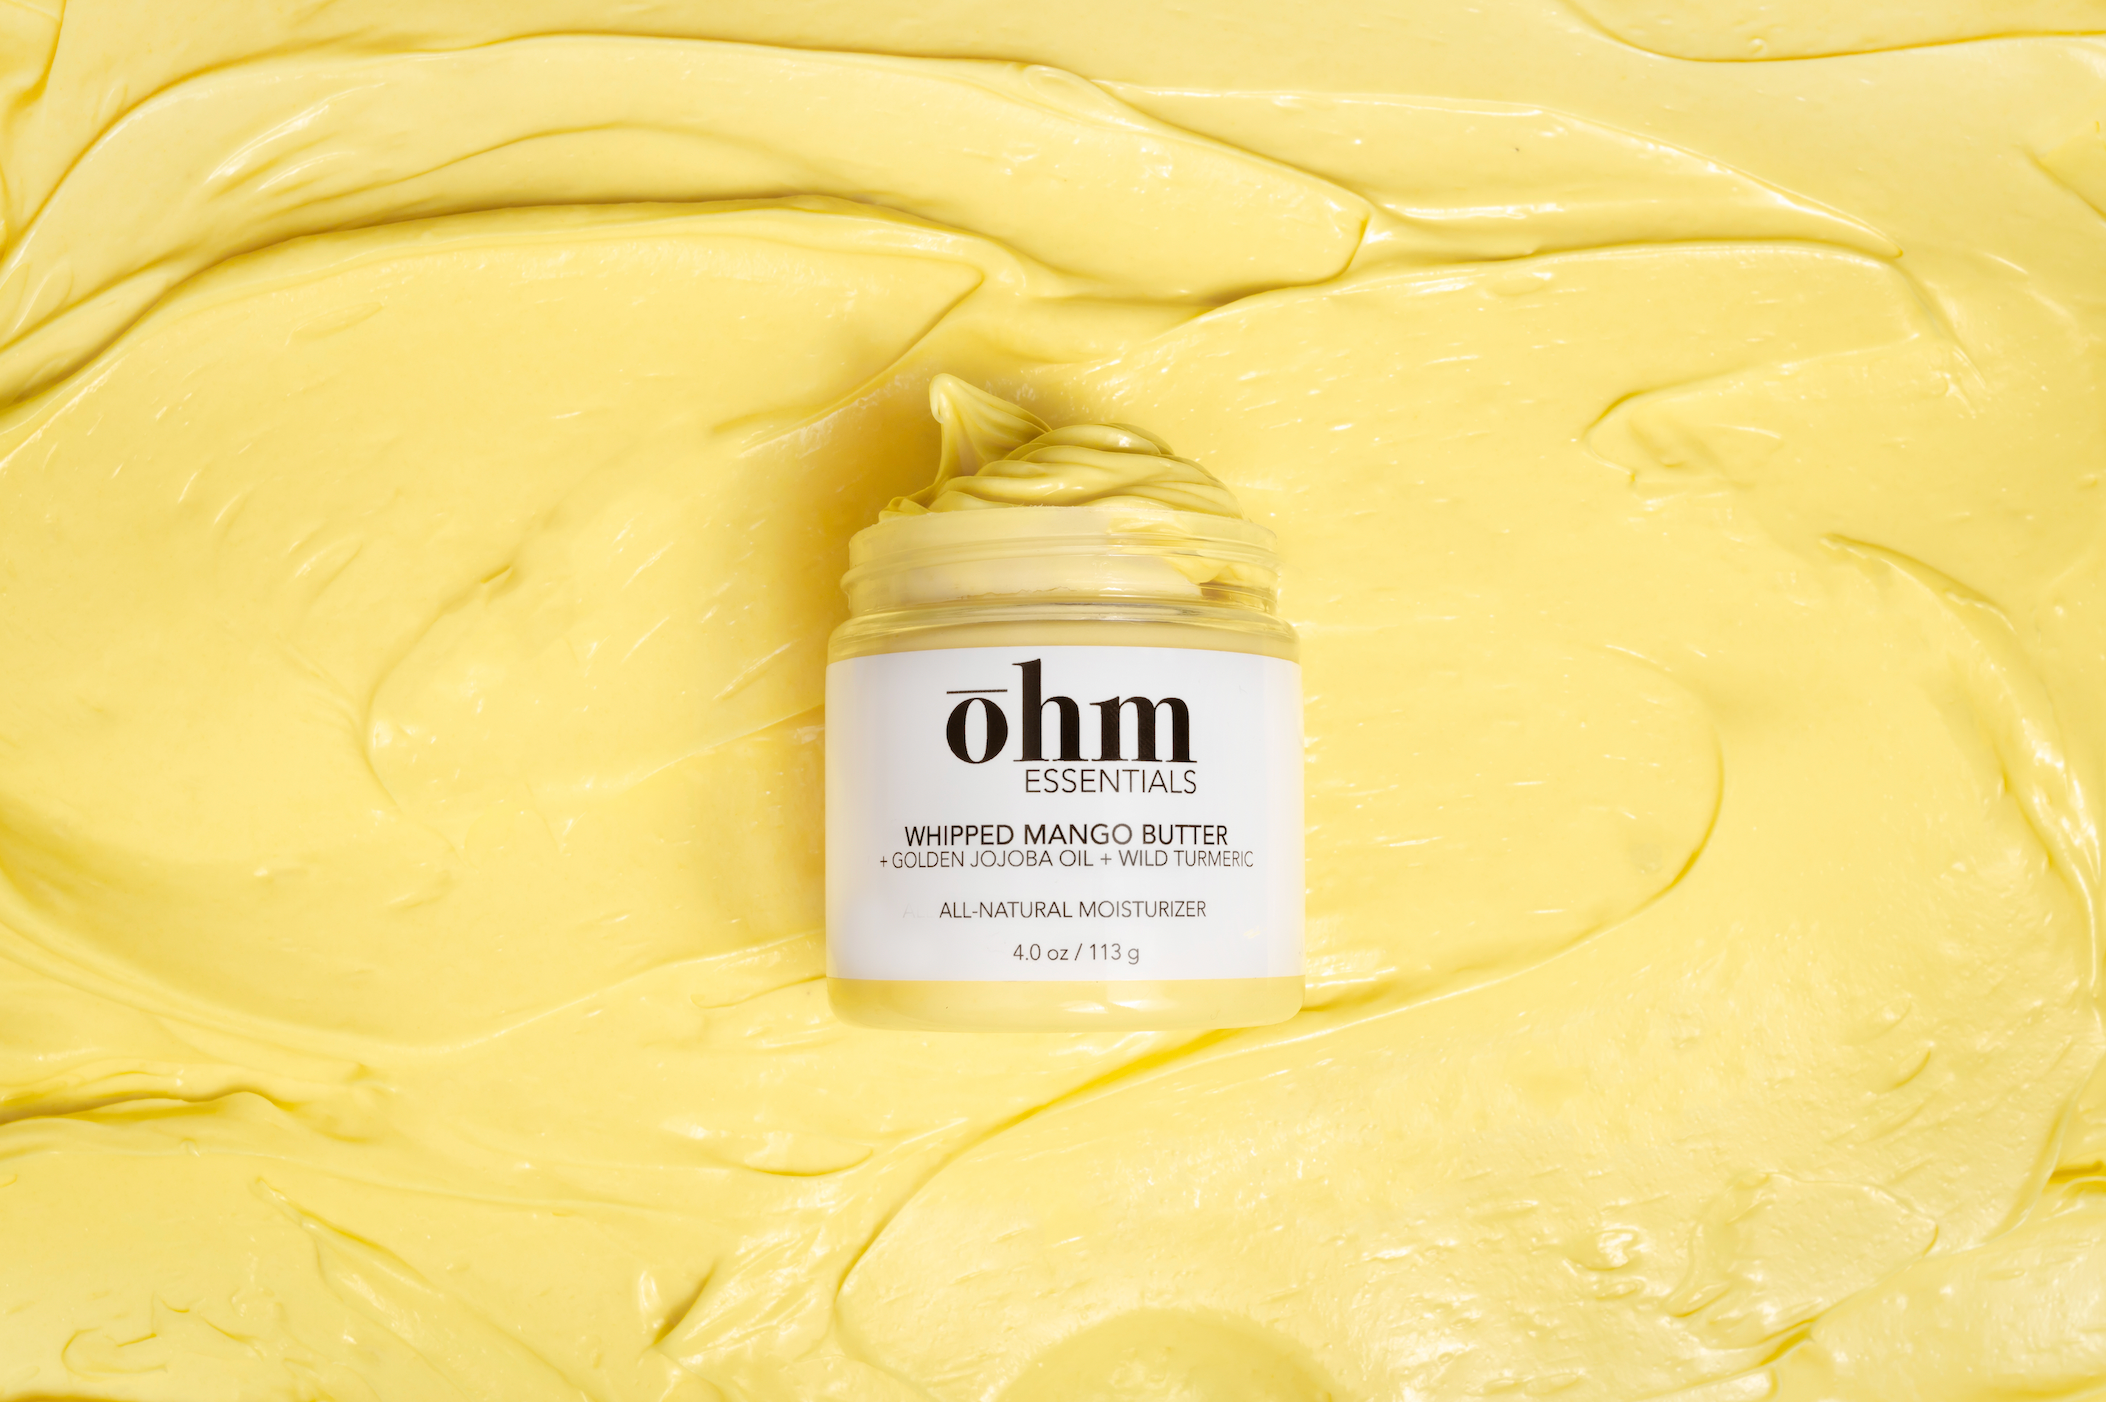 OHM ESSENTIALS WHIPPED MANGO BUTTER